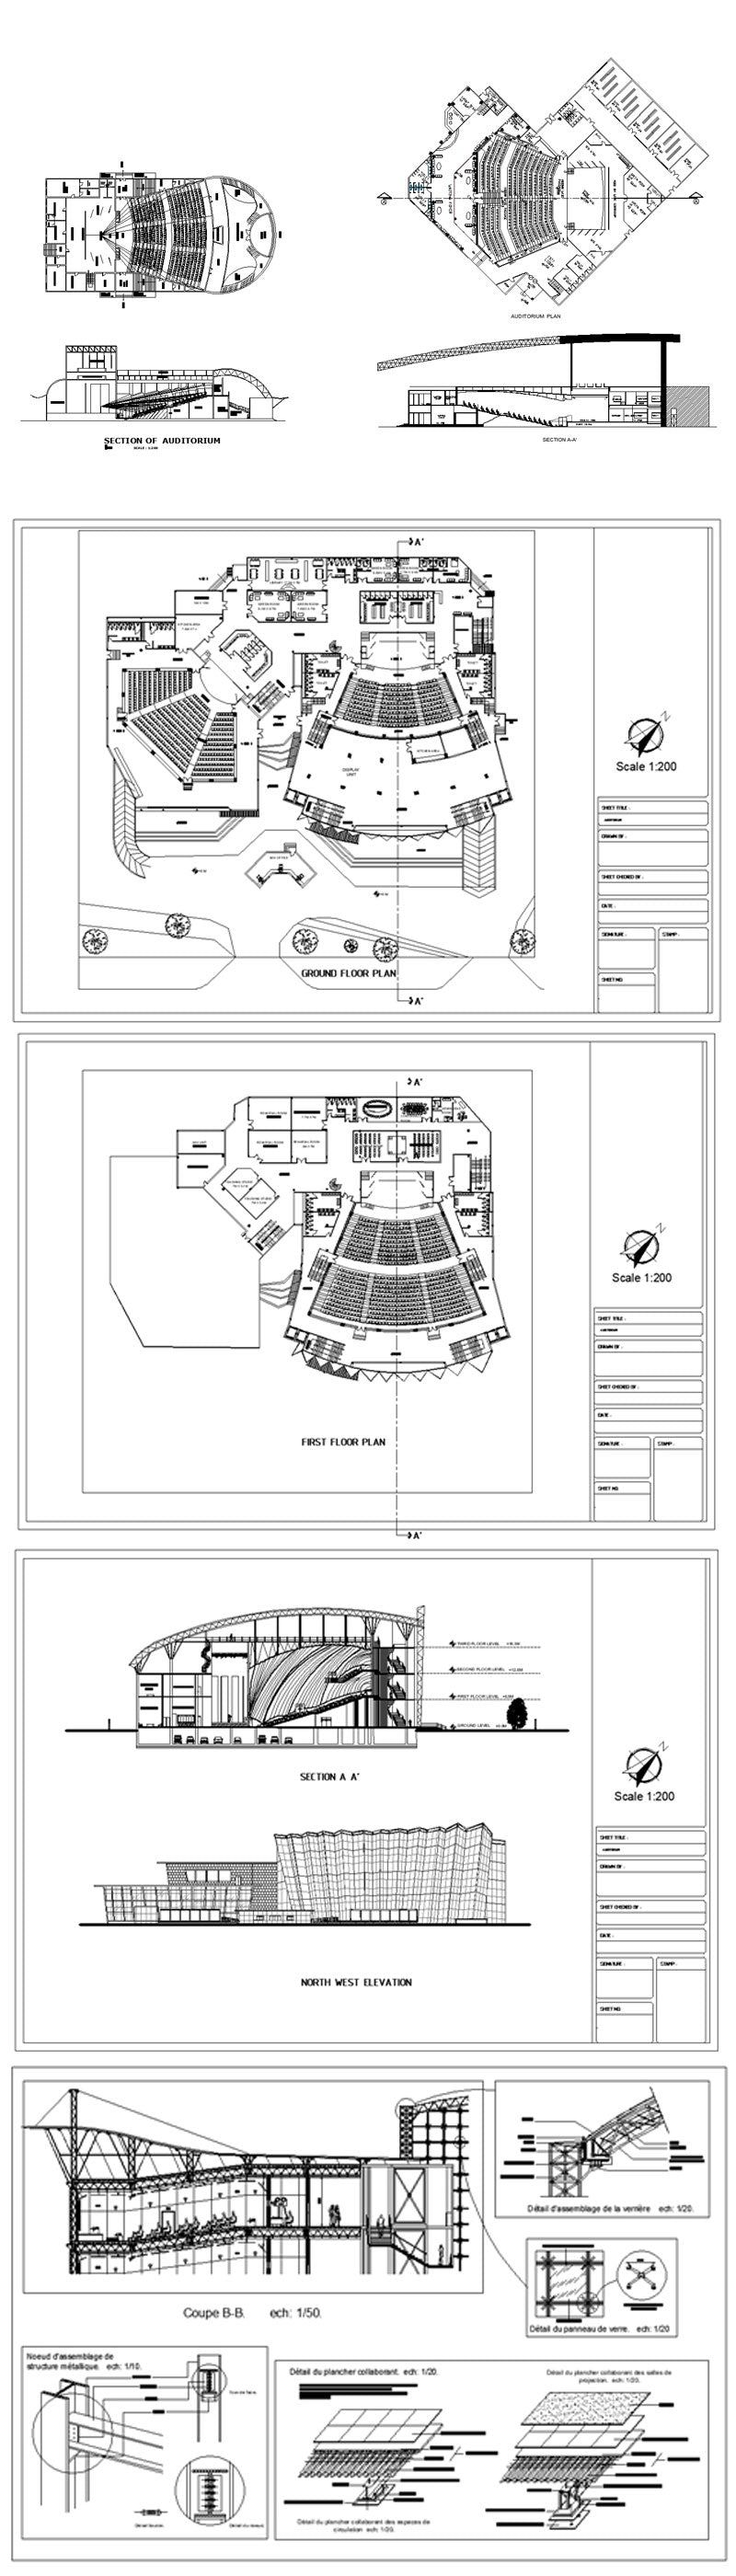 ★【Cinema, Theaters CAD Details Collection V.1】@Auditorium ,Cinema, Theaters Design,Autocad Blocks,Cinema, Theaters Details,Cinema, Theaters Section,elevation design drawings